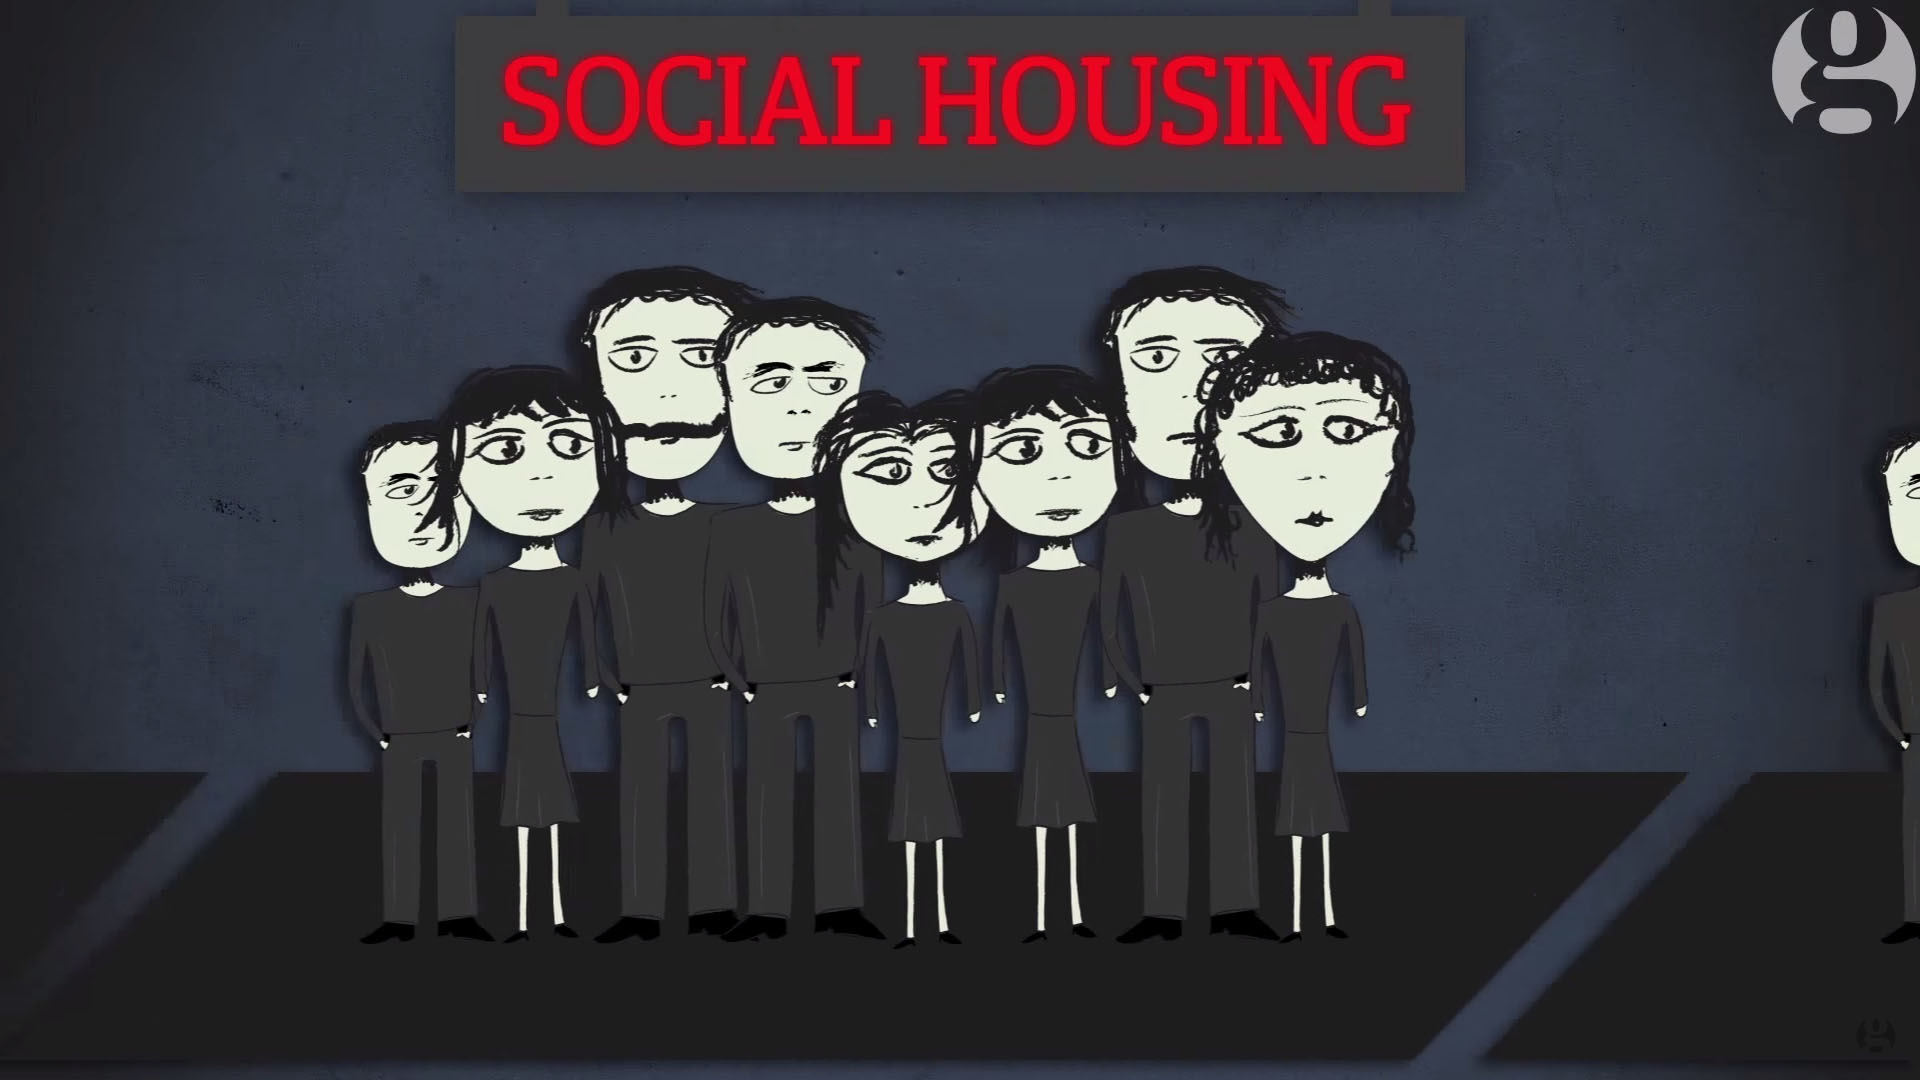 Social housing scene from animation for the guardian